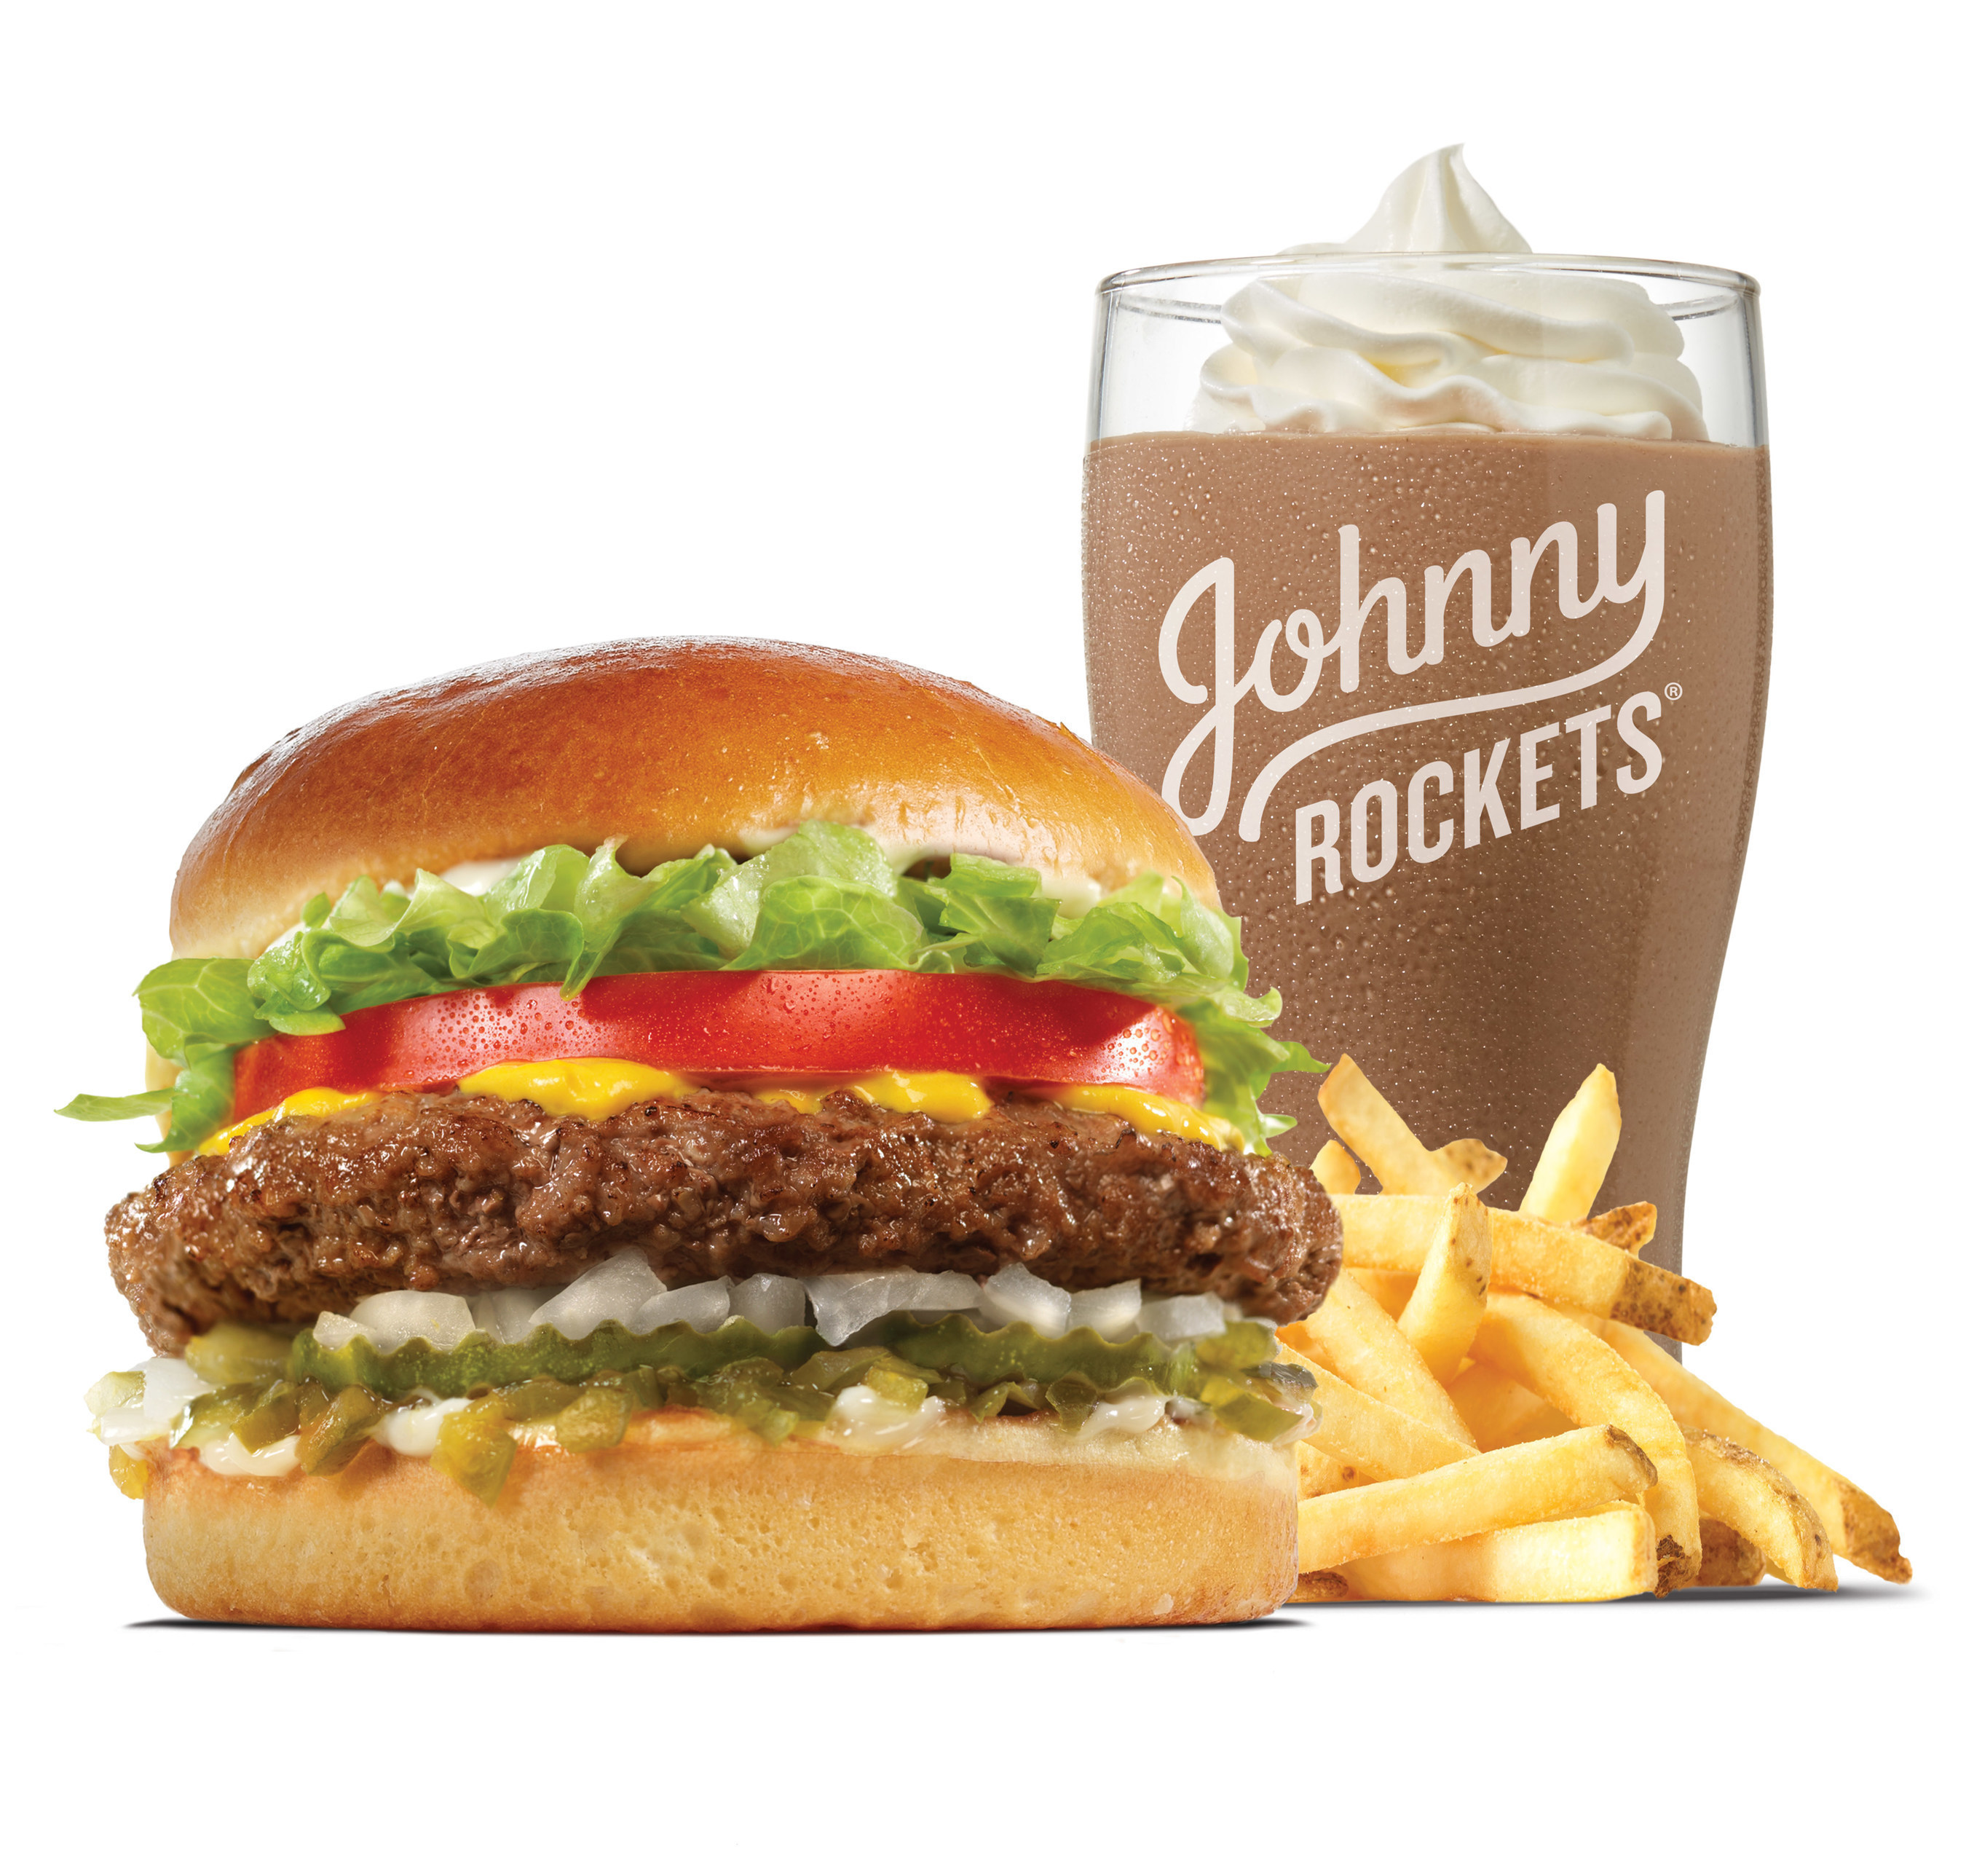 The original, fresh, never frozen, 100% beef burger, hand-spun chocolate shake and fries, on the menu at the new Johnny Rockets at Tucson Premium Outlets, Tucson, AZ.